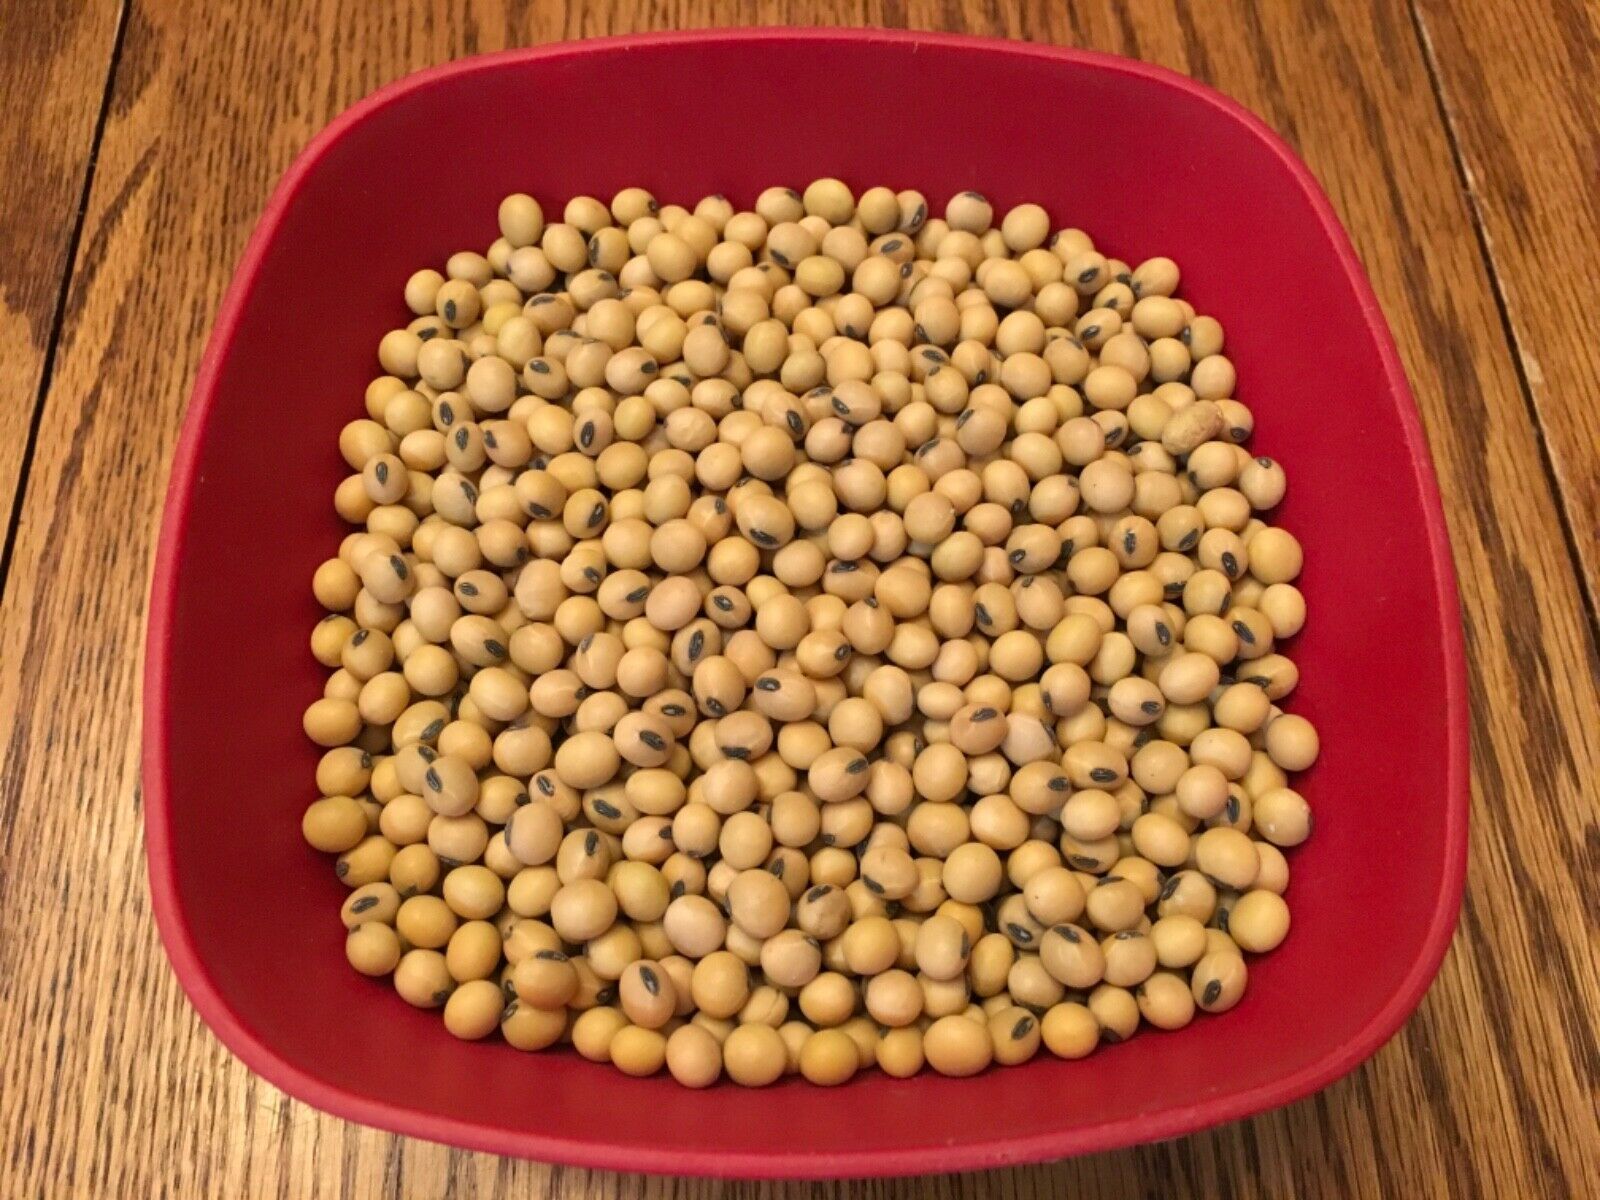 Raw Soybeans Non-gmo For Tofu, Soy Milk, Or Sprouts. 2020 Iowa Crop! 1-25+ Lb